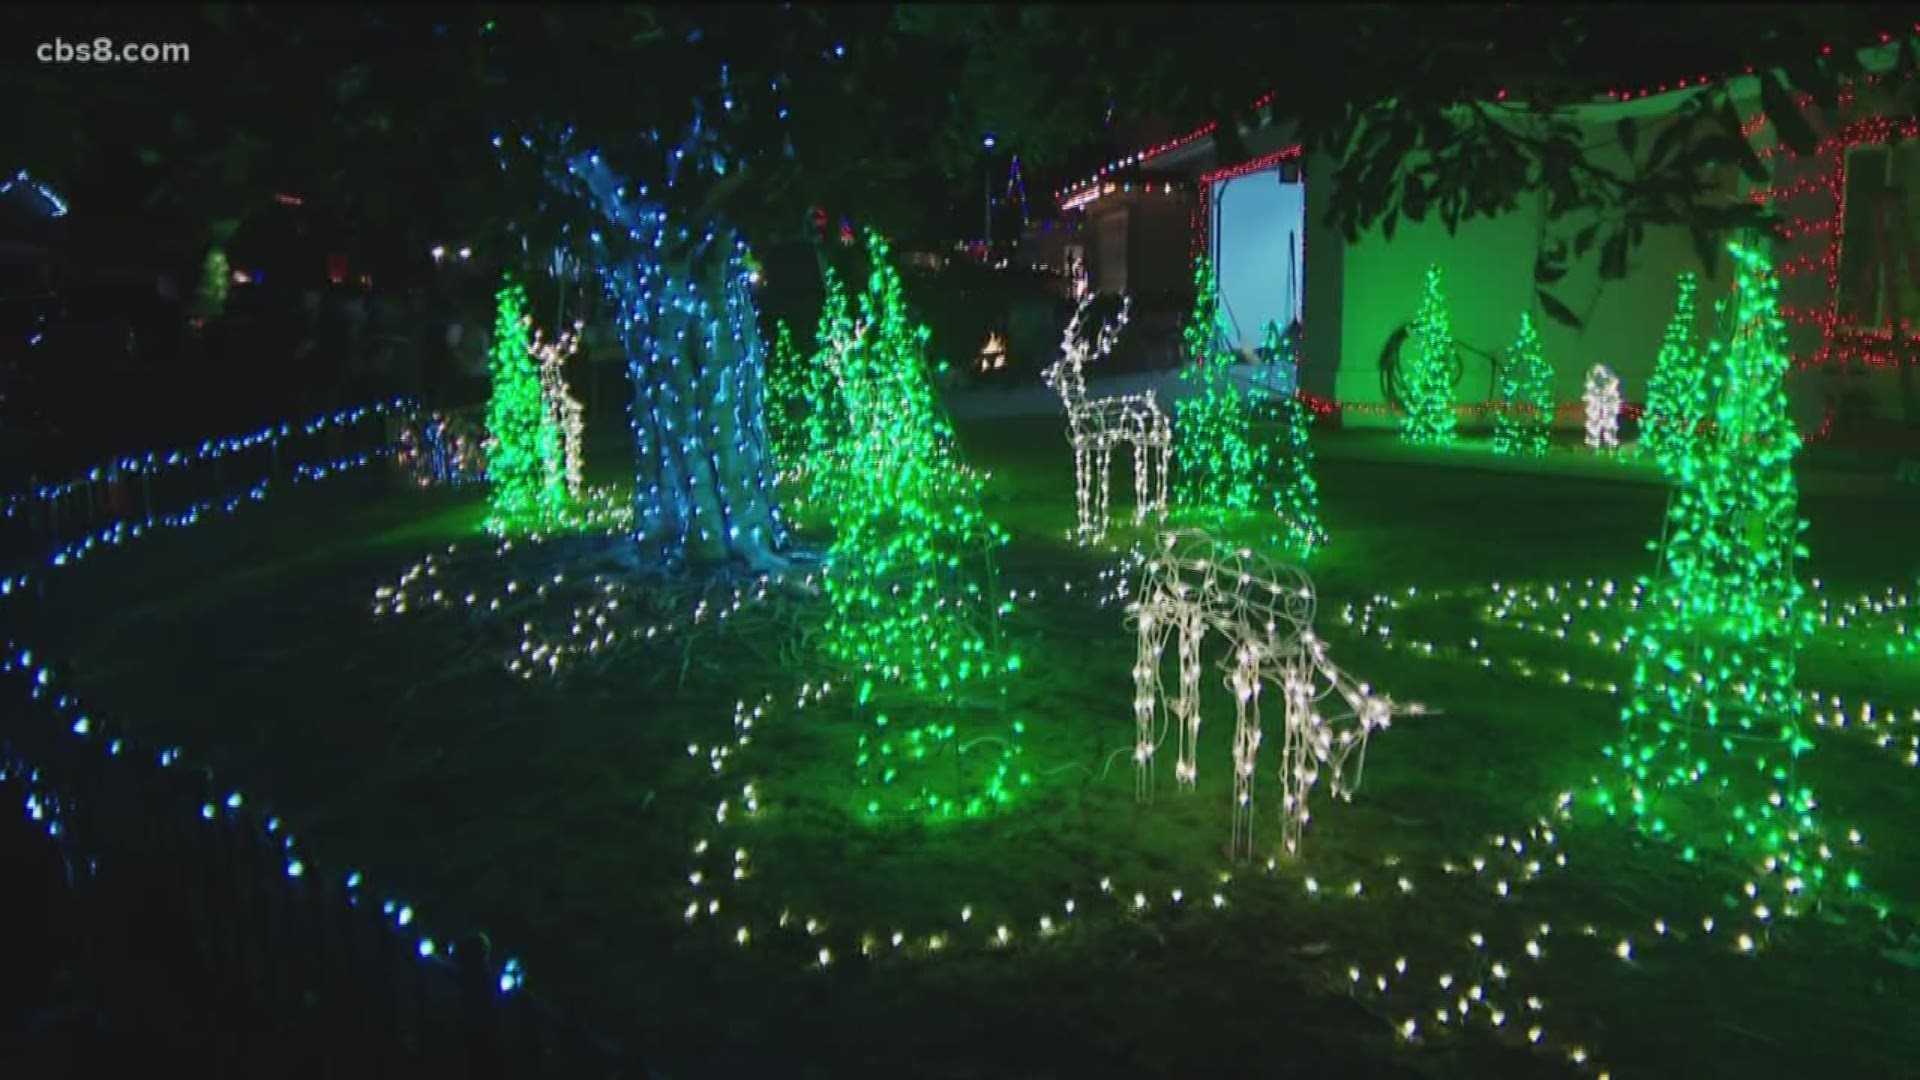 Christmas lights are a family tradition on Christmas Eve and for an East County community, it’s been a growing for more than three decades.